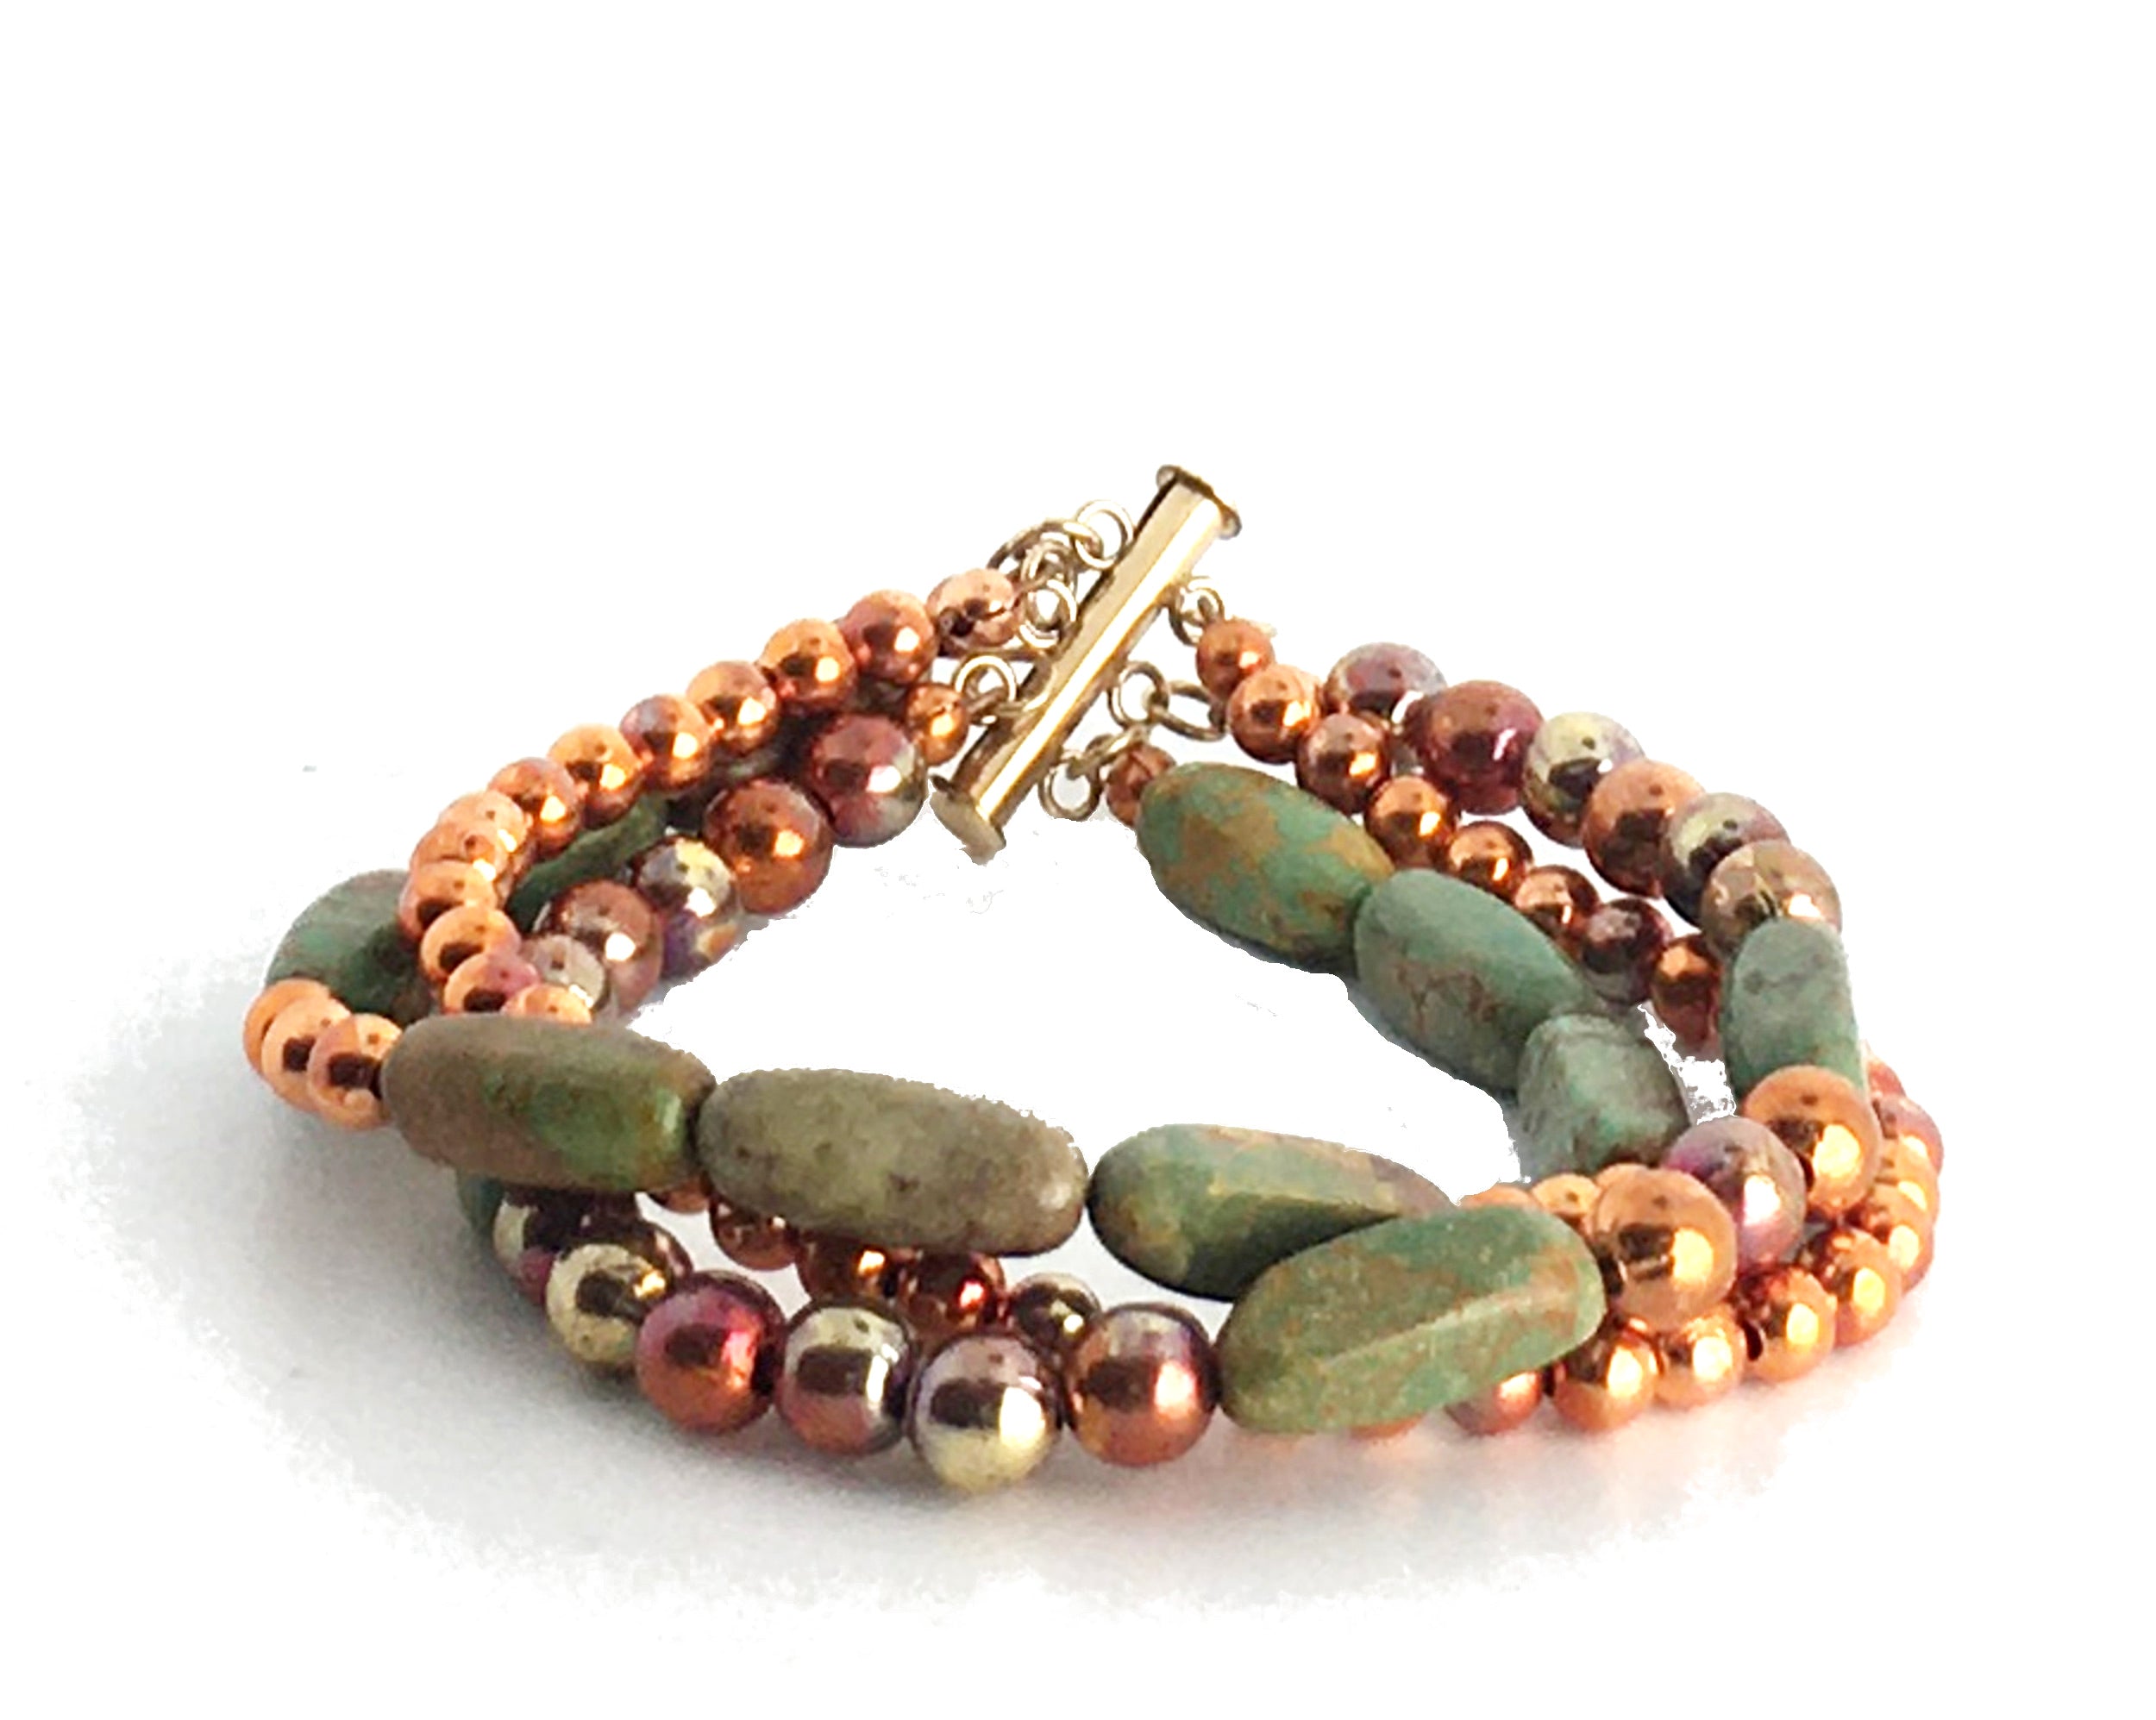 Sonoran Sunset Triple Strand Flamed Copper and Turquoise Bracelet